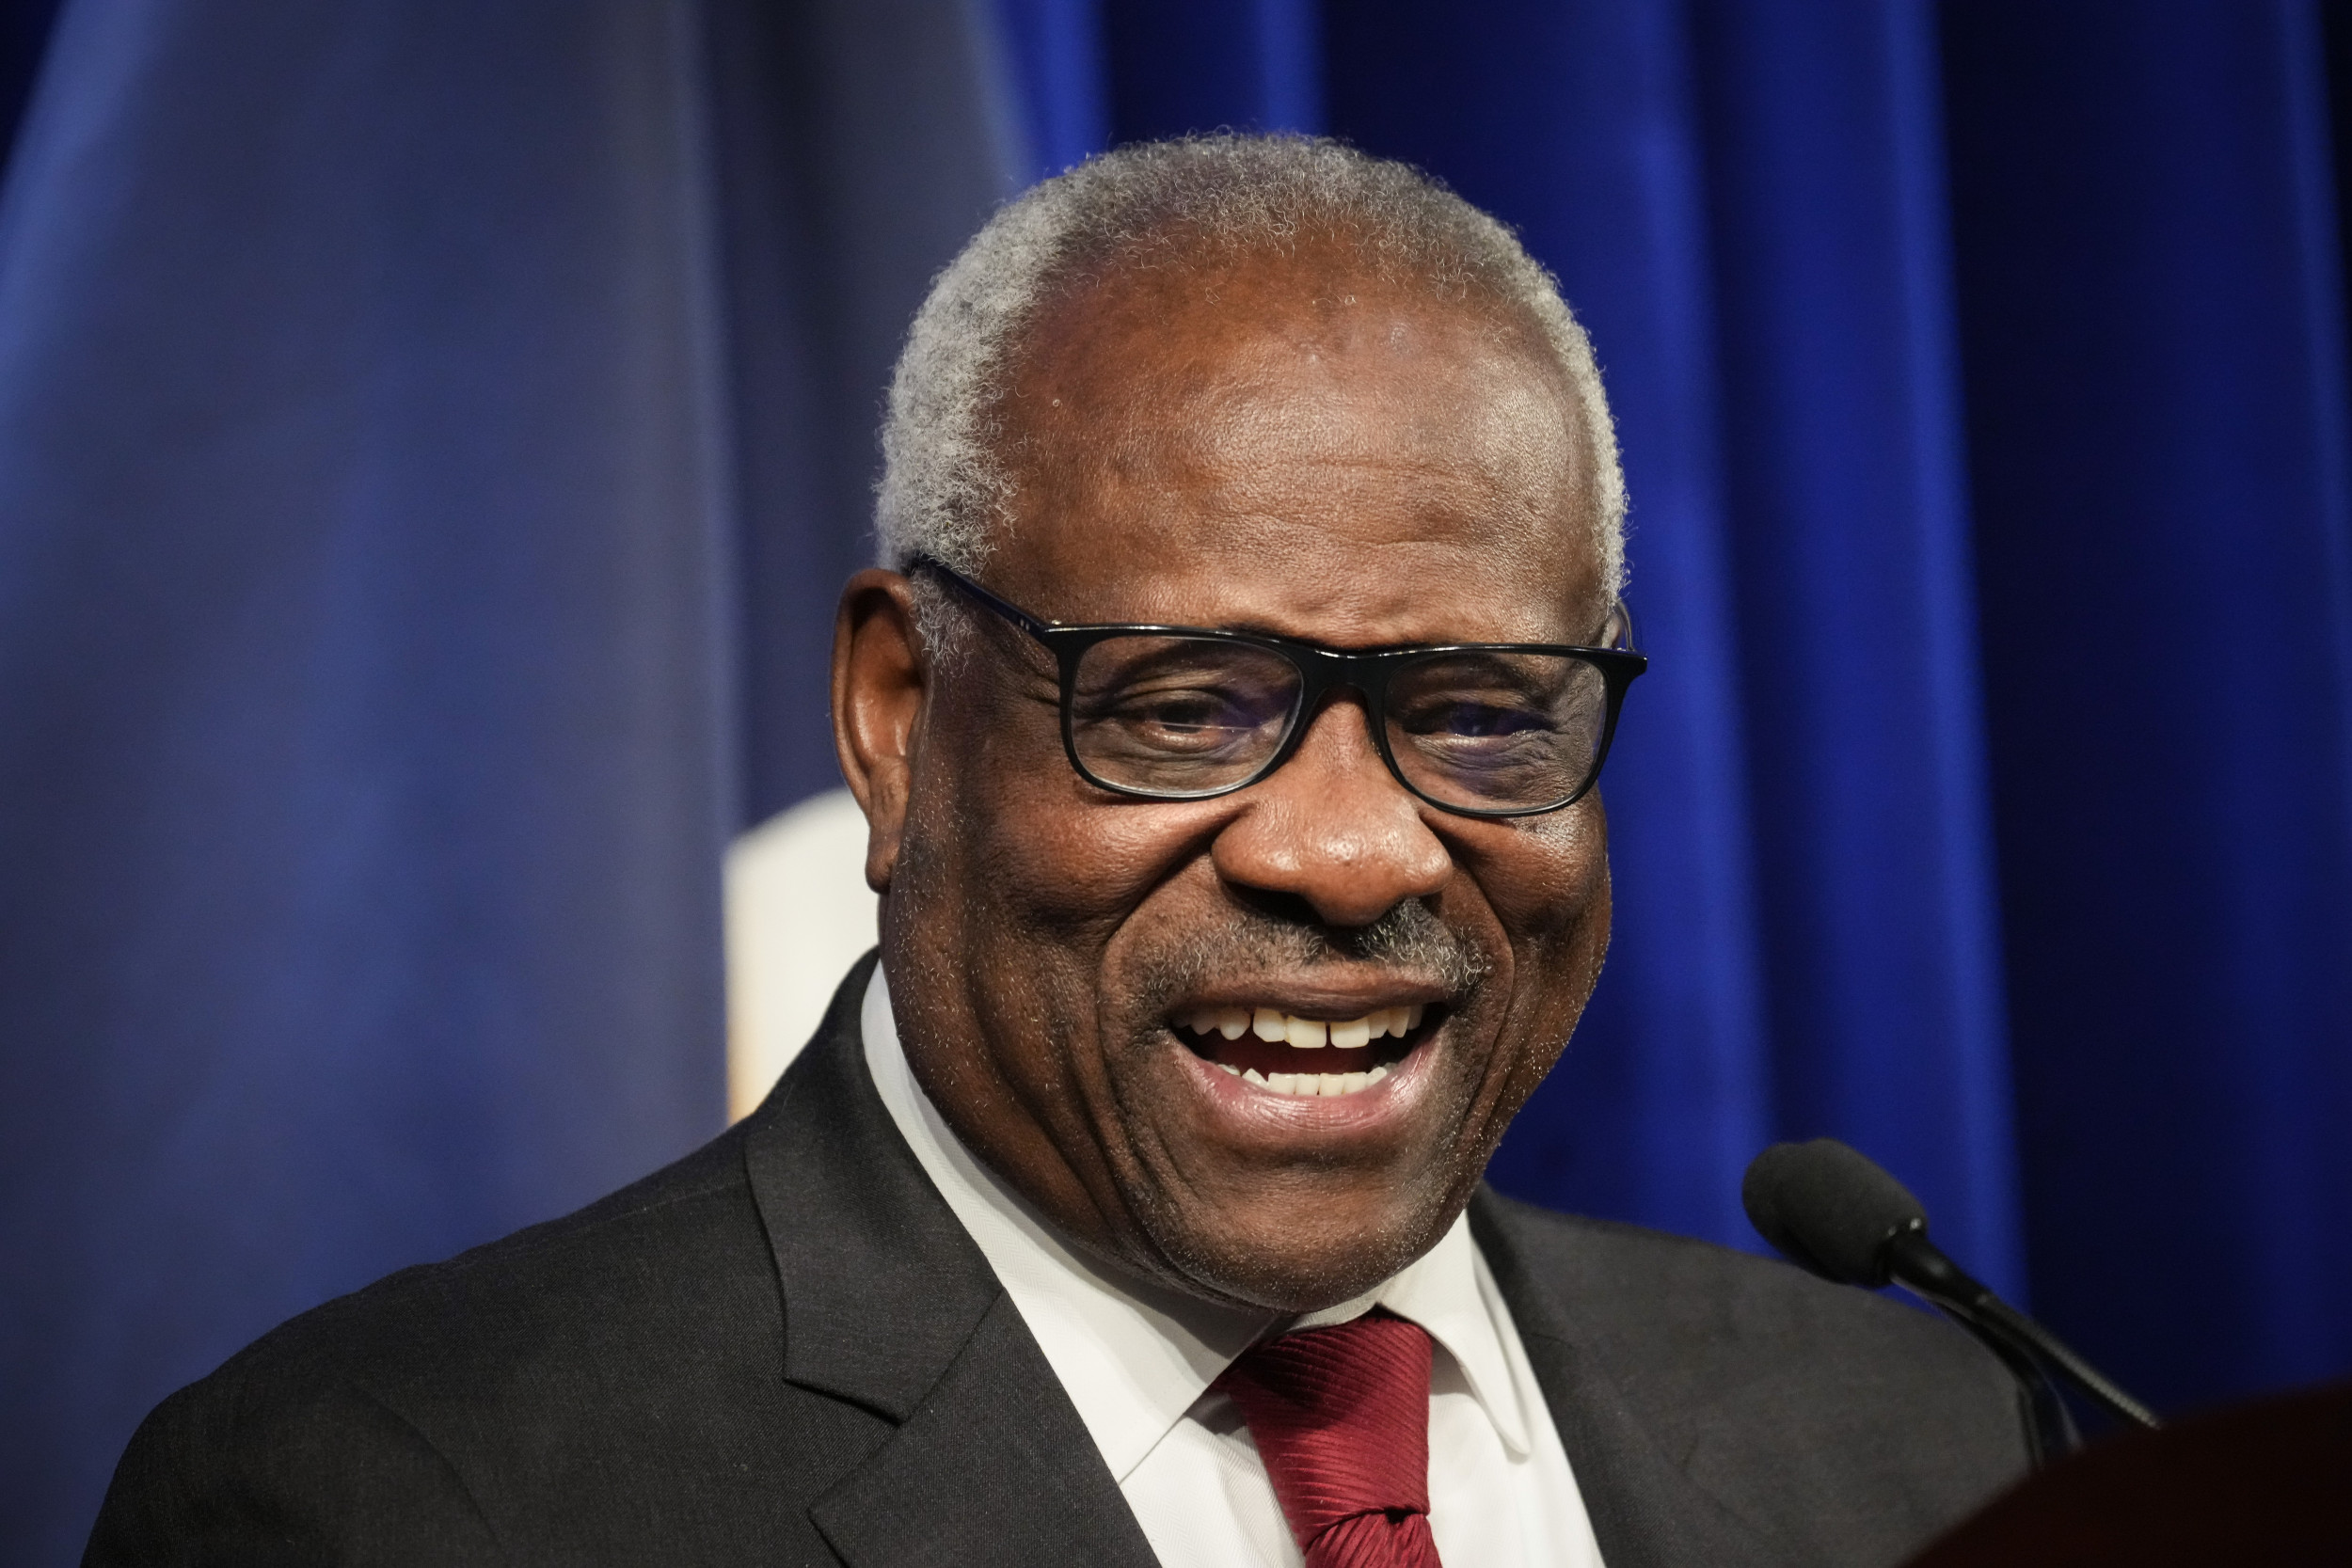 Fact Check: Did Clarence Thomas go to Yale under affirmative action policy?